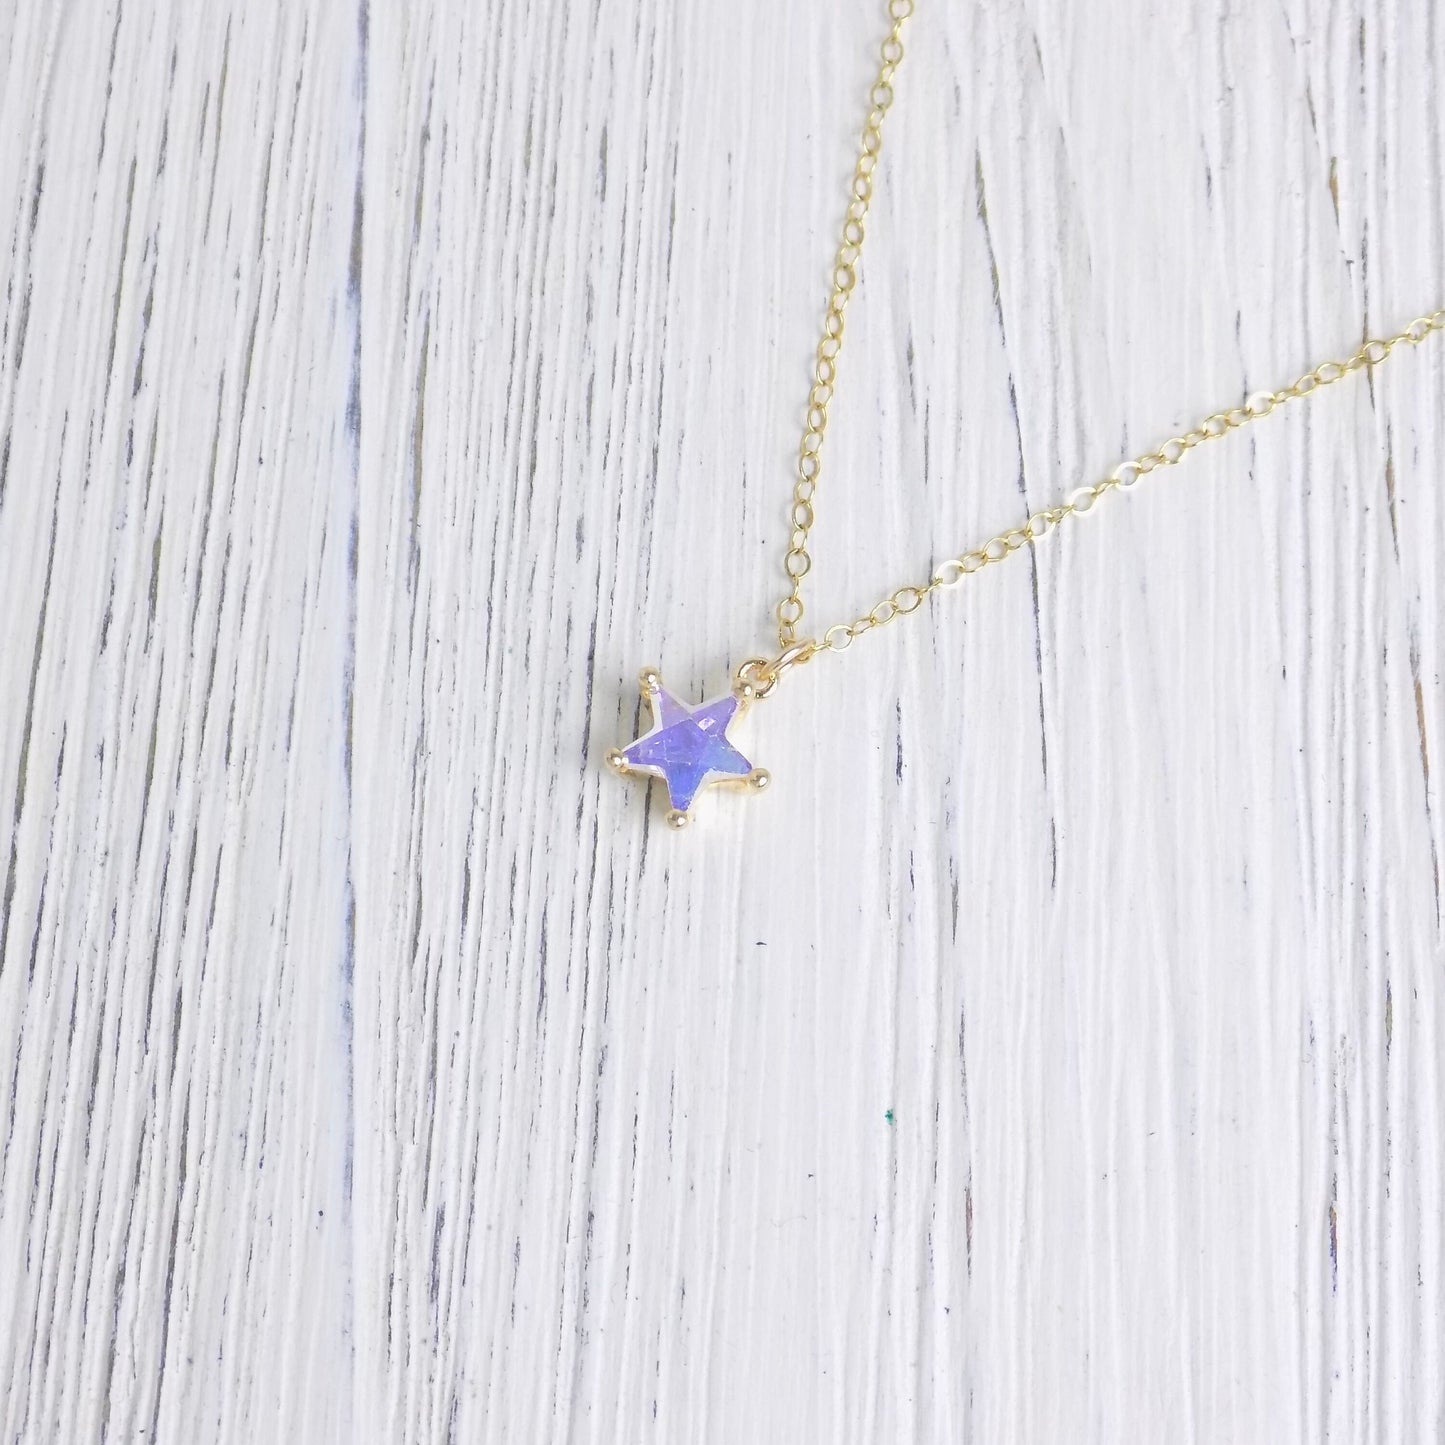 Valentines Day Gift, Tiny Star Necklace, Purple Aura Quartz Charm Necklace For Layering, 14K Gold Filled Chain, M6-27